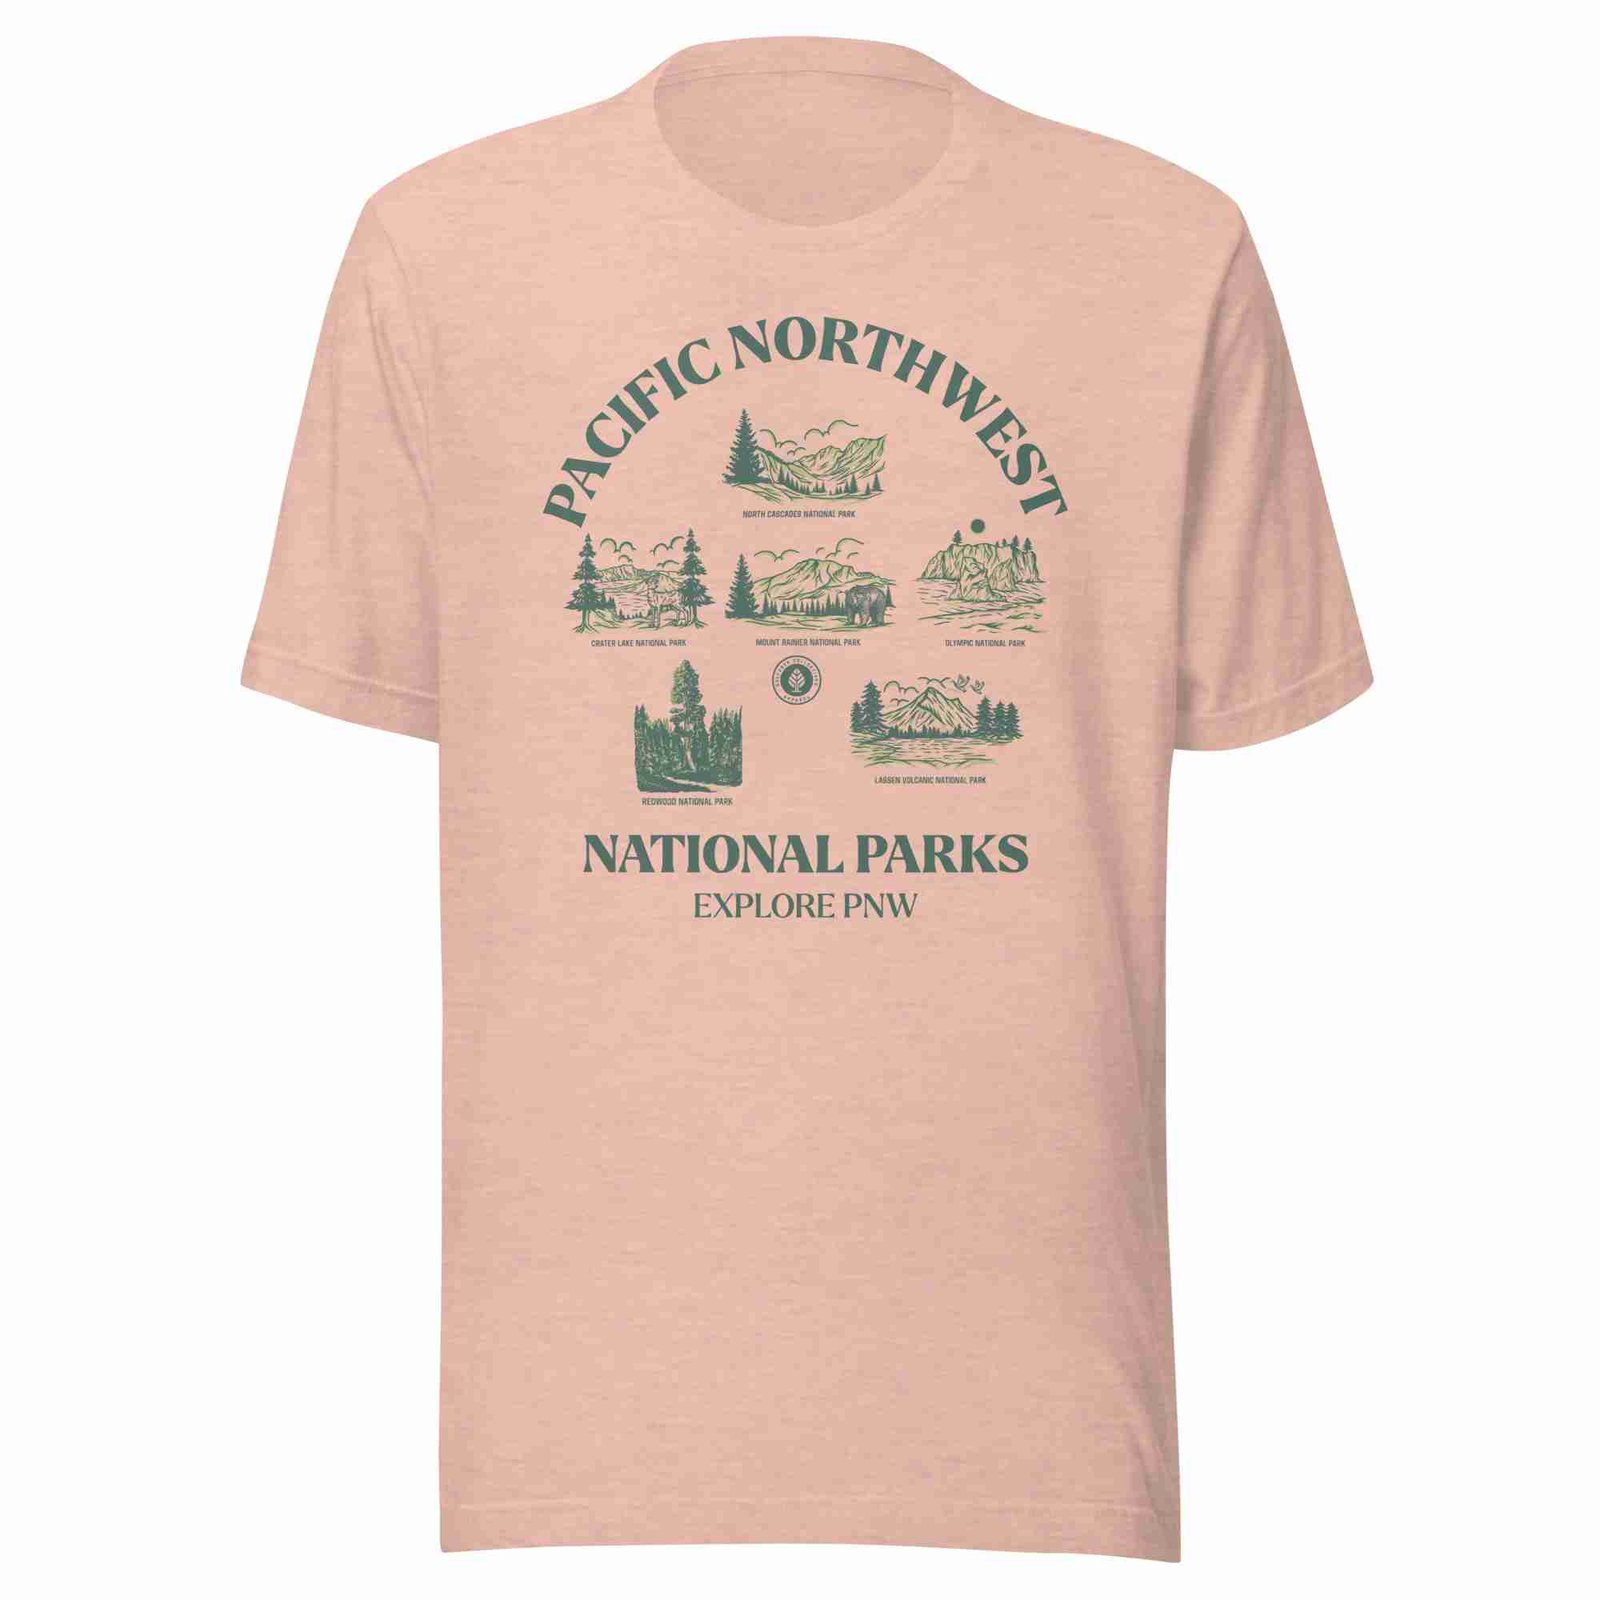 Pacific Northwest National Parks Tee